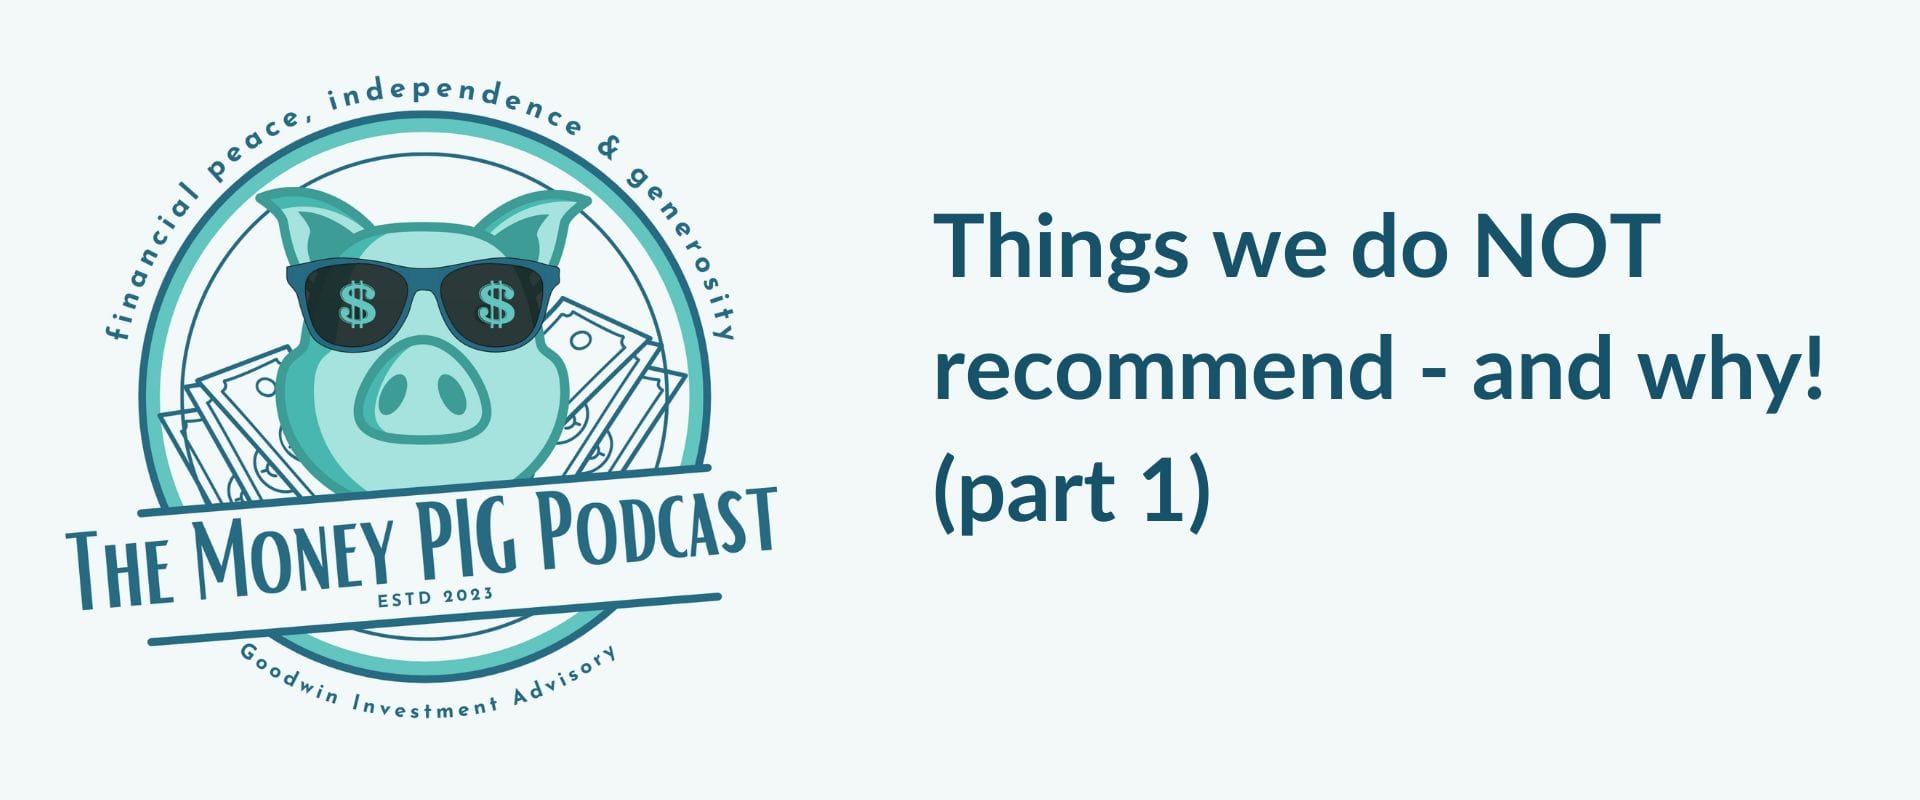 Things we do NOT recommend – and why! (part 1)